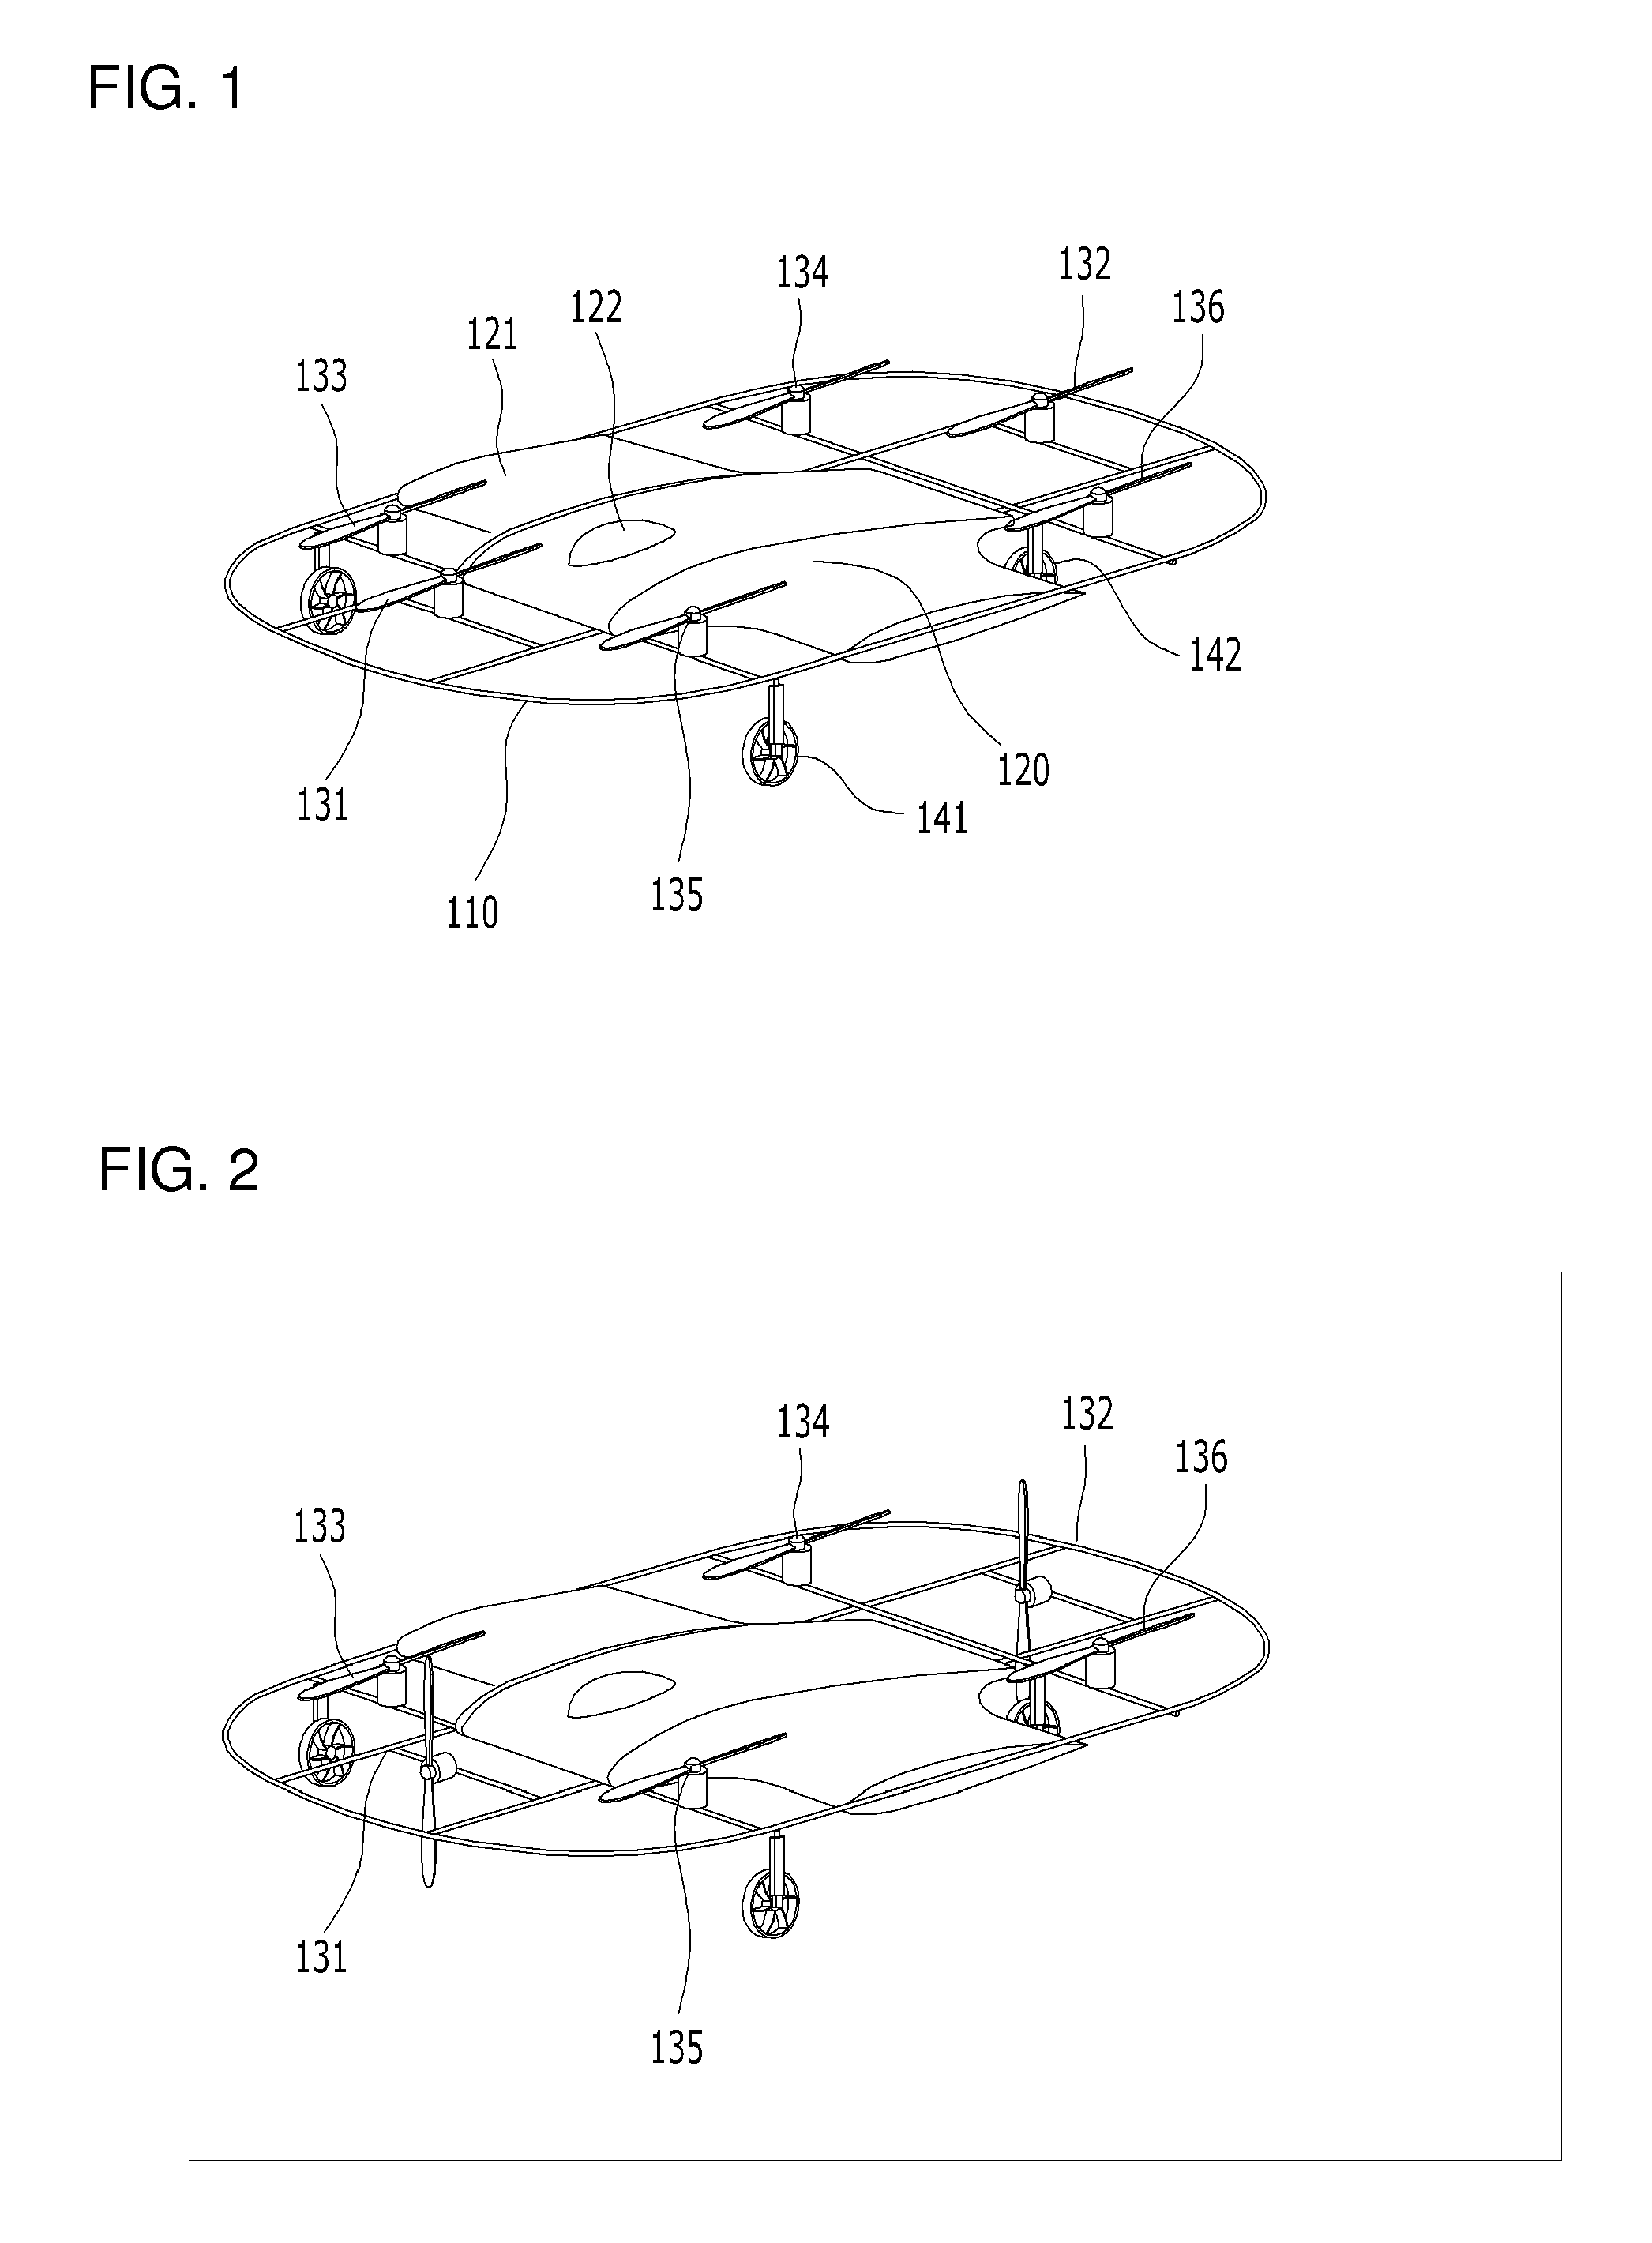 Multi-stage tilting and multi-rotor flying car